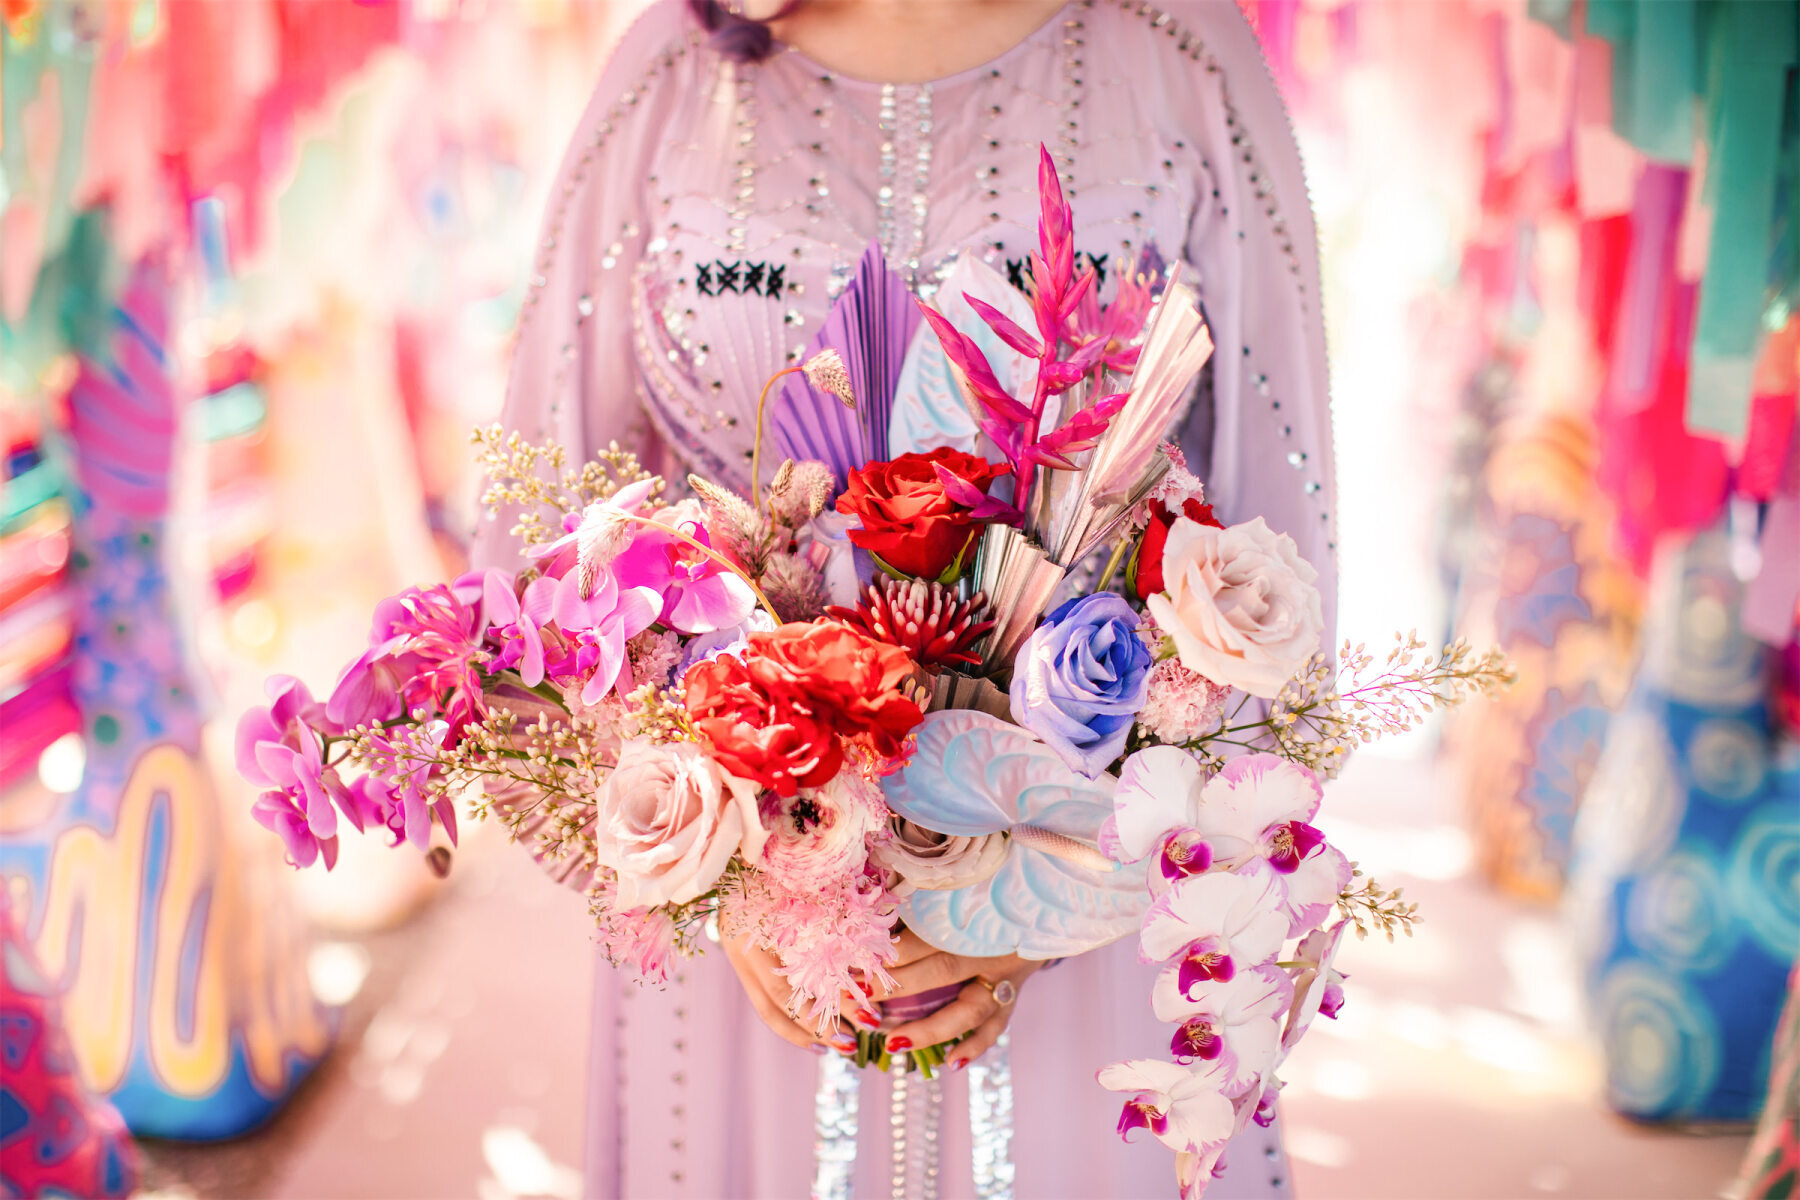 A bride wearing a light purple dress holds her multi-color bouquet with iridescent elements and a textural combination of flowers at her vibrant outdoor wedding in Fresno, California.